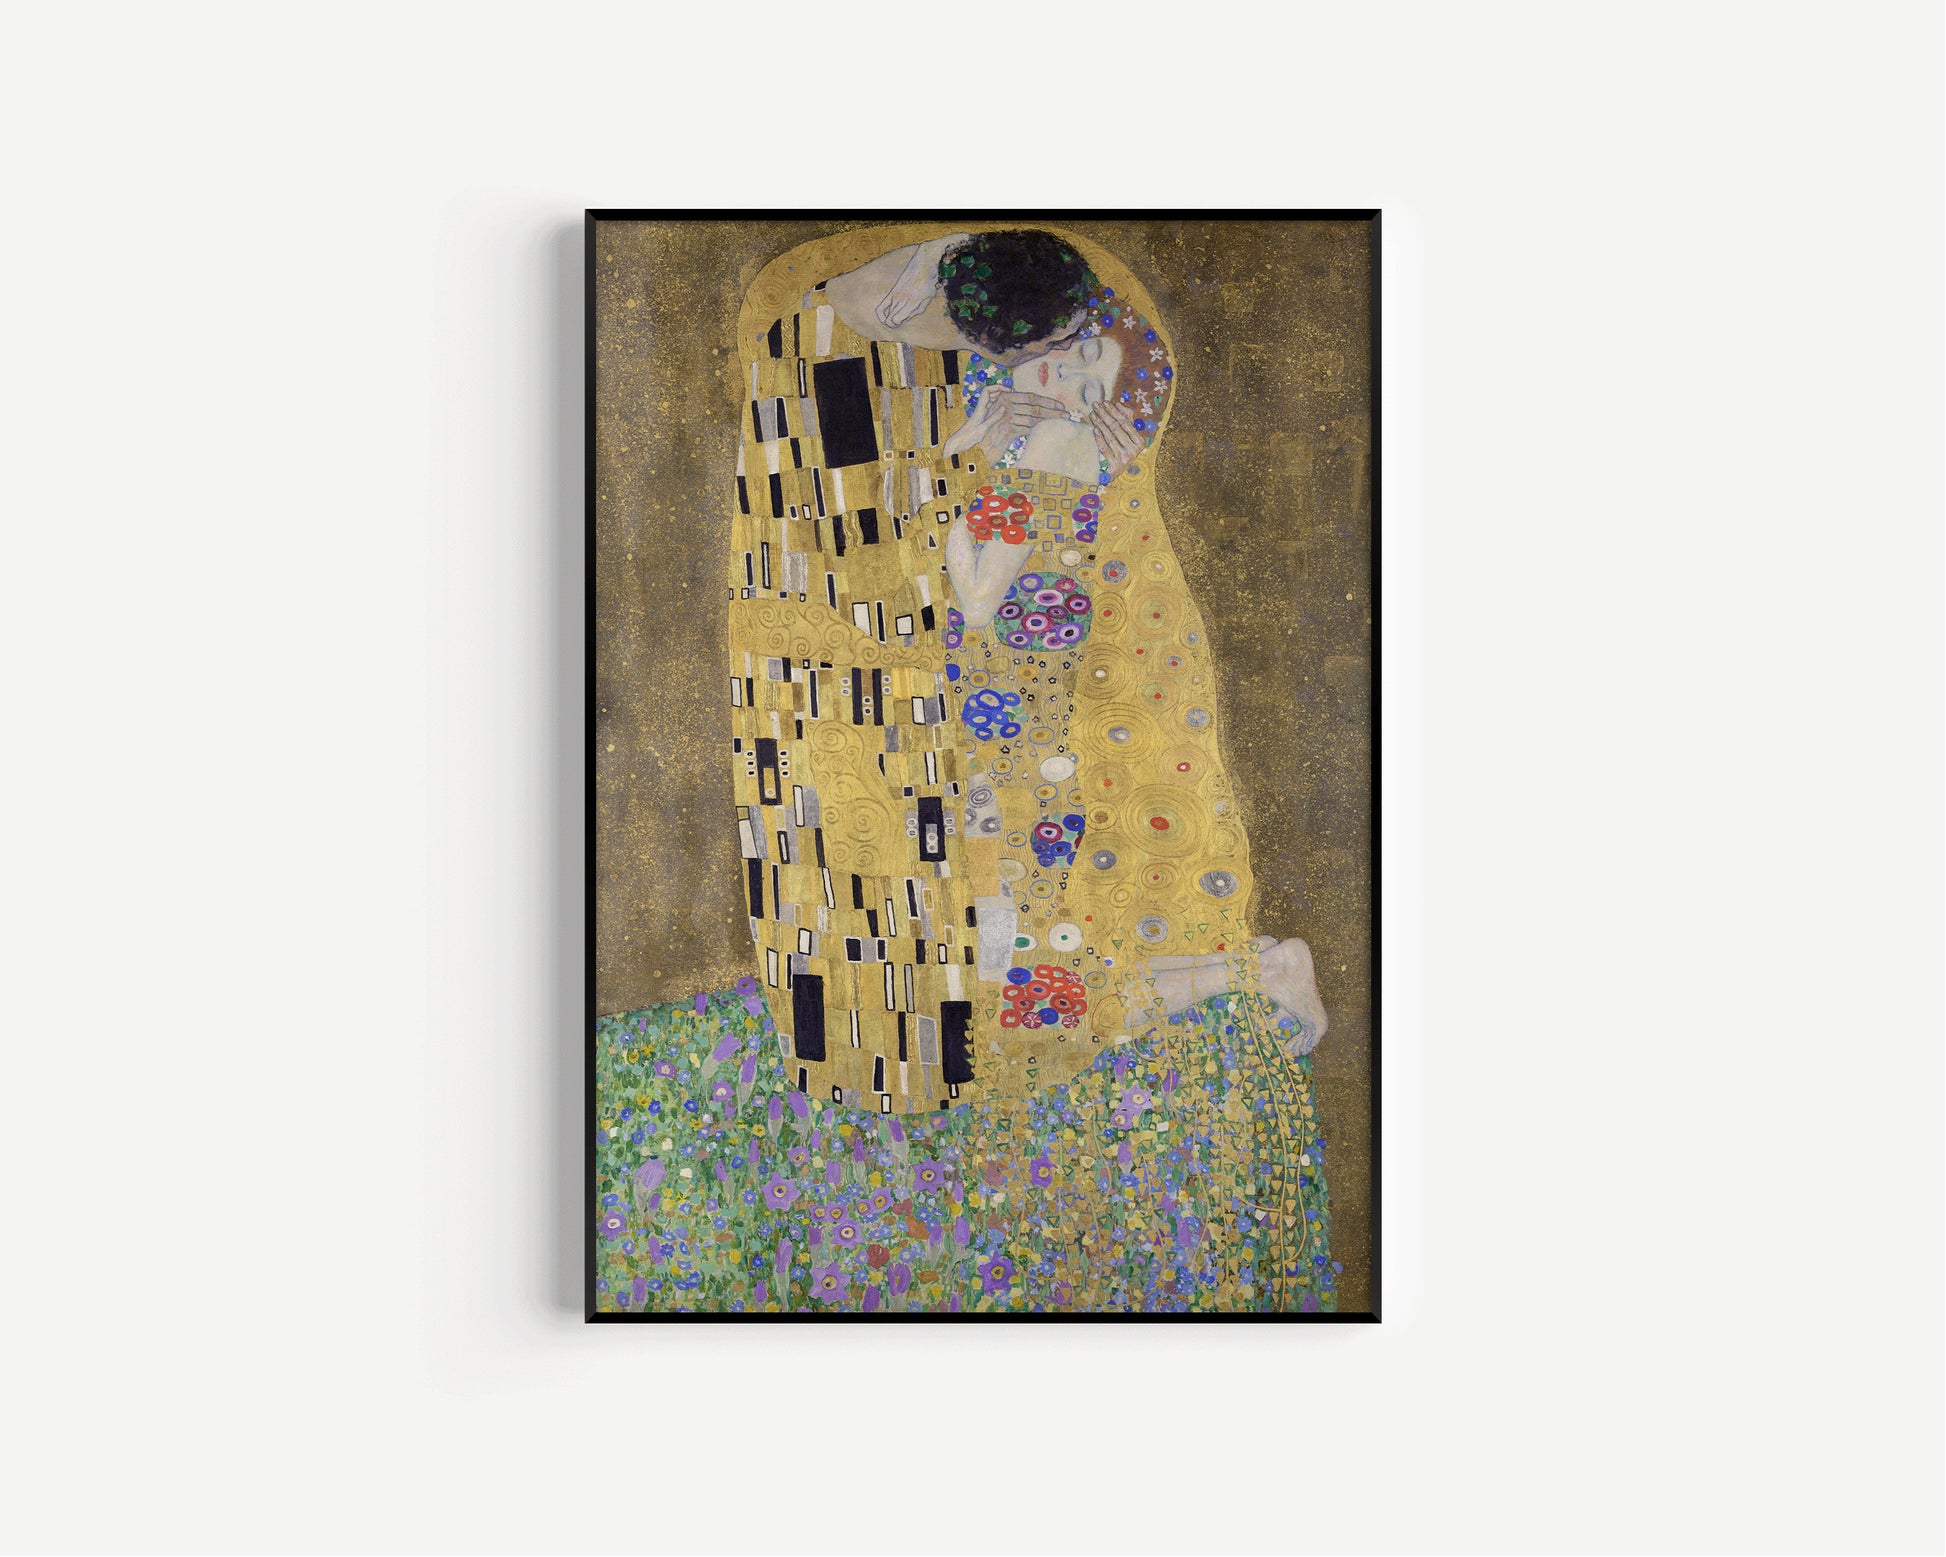 Gustav Klimt Set of 2 Prints The Embrace and The Kiss Iconic Art Museum Famous Painting Framed Ready to Hang Home Office Poster Print Decor